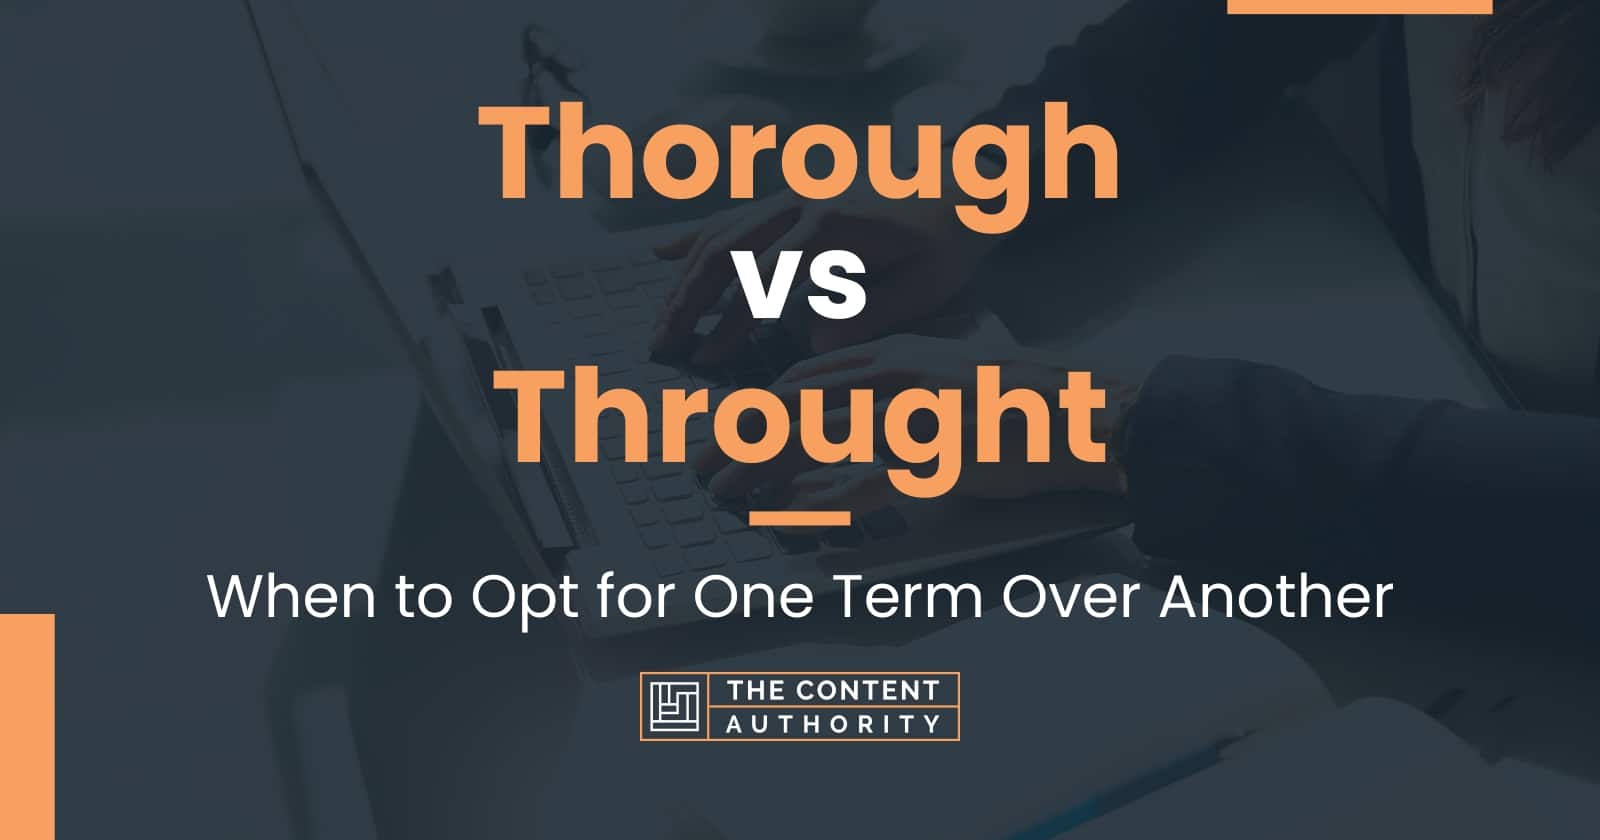 Thorough vs Throught: When to Opt for One Term Over Another